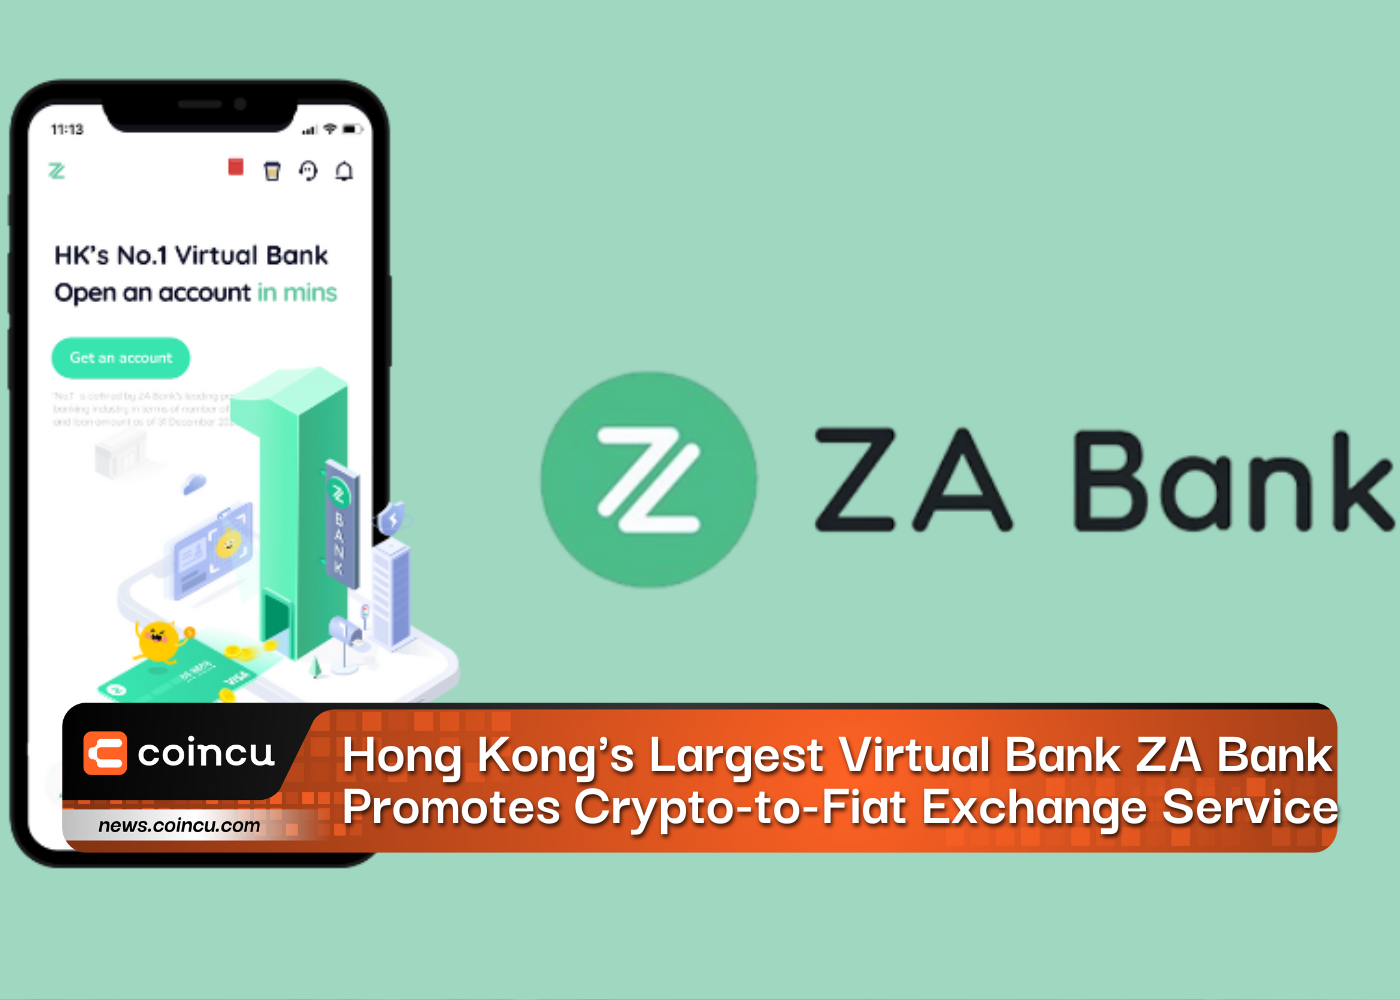 Hong Kong's Largest Virtual Bank ZA Bank Promotes Crypto-to-Fiat Exchange Service